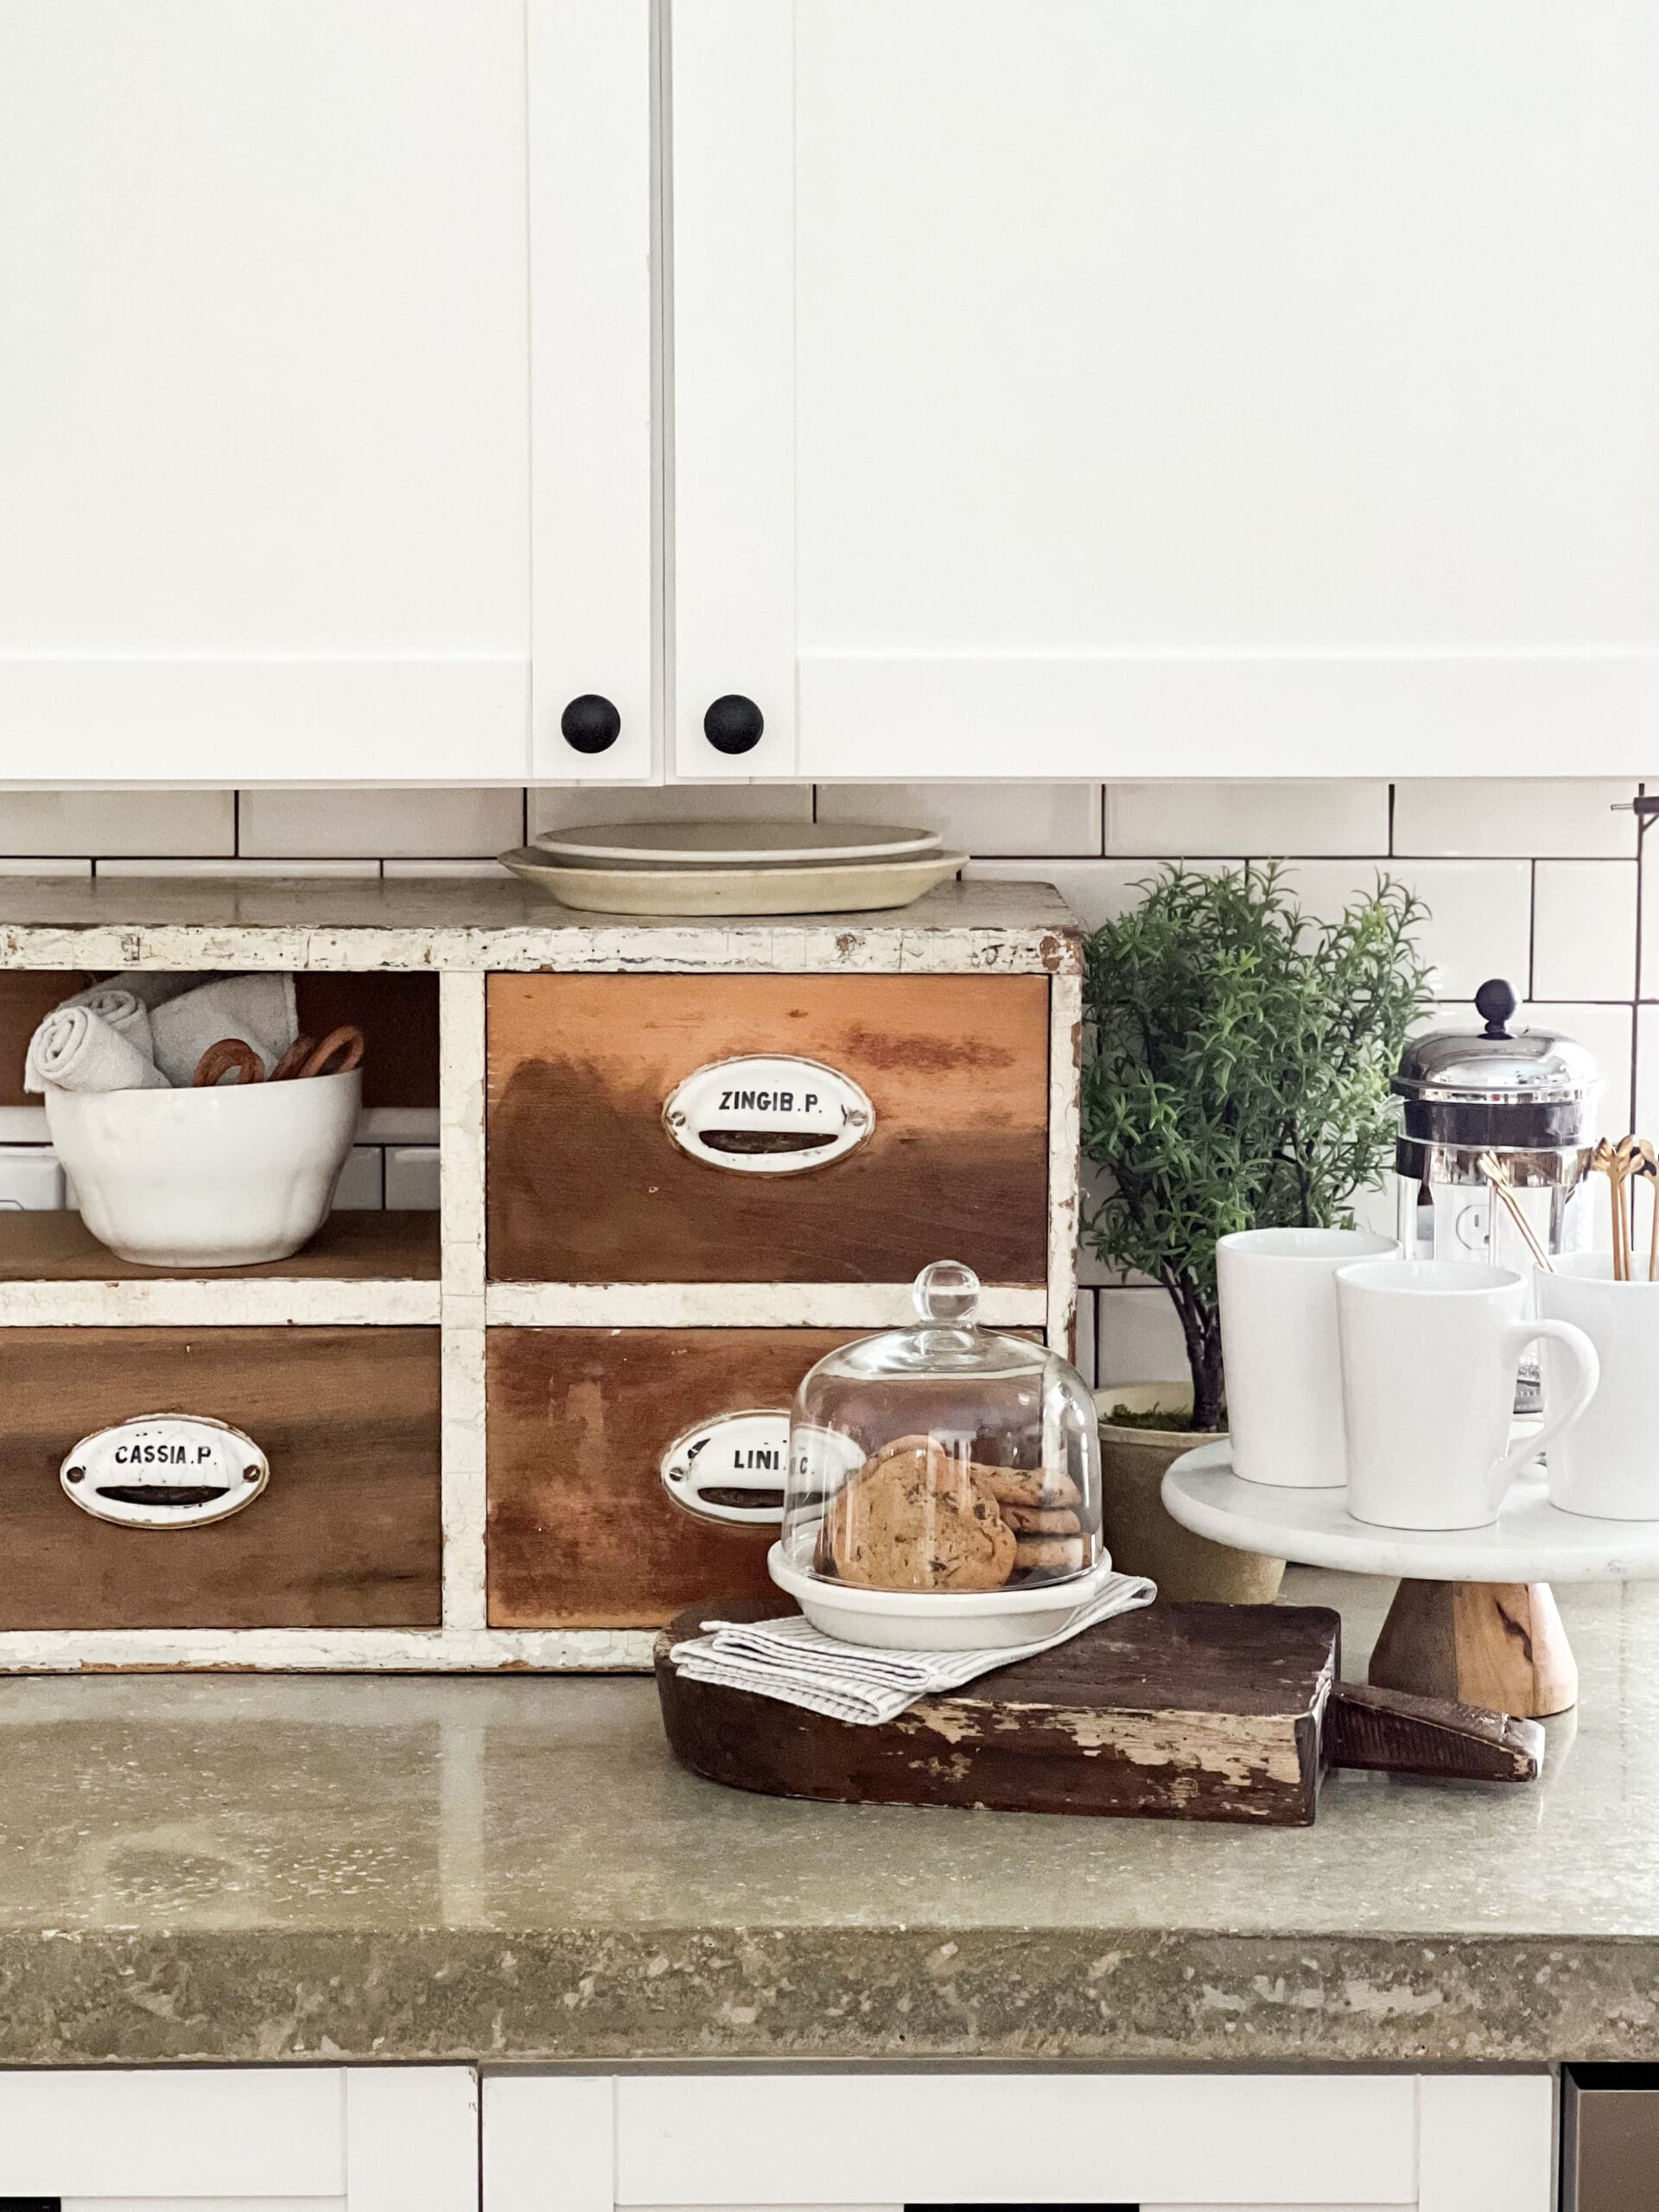 Coffee bar set on concrete countertops with vintage drawers in background.